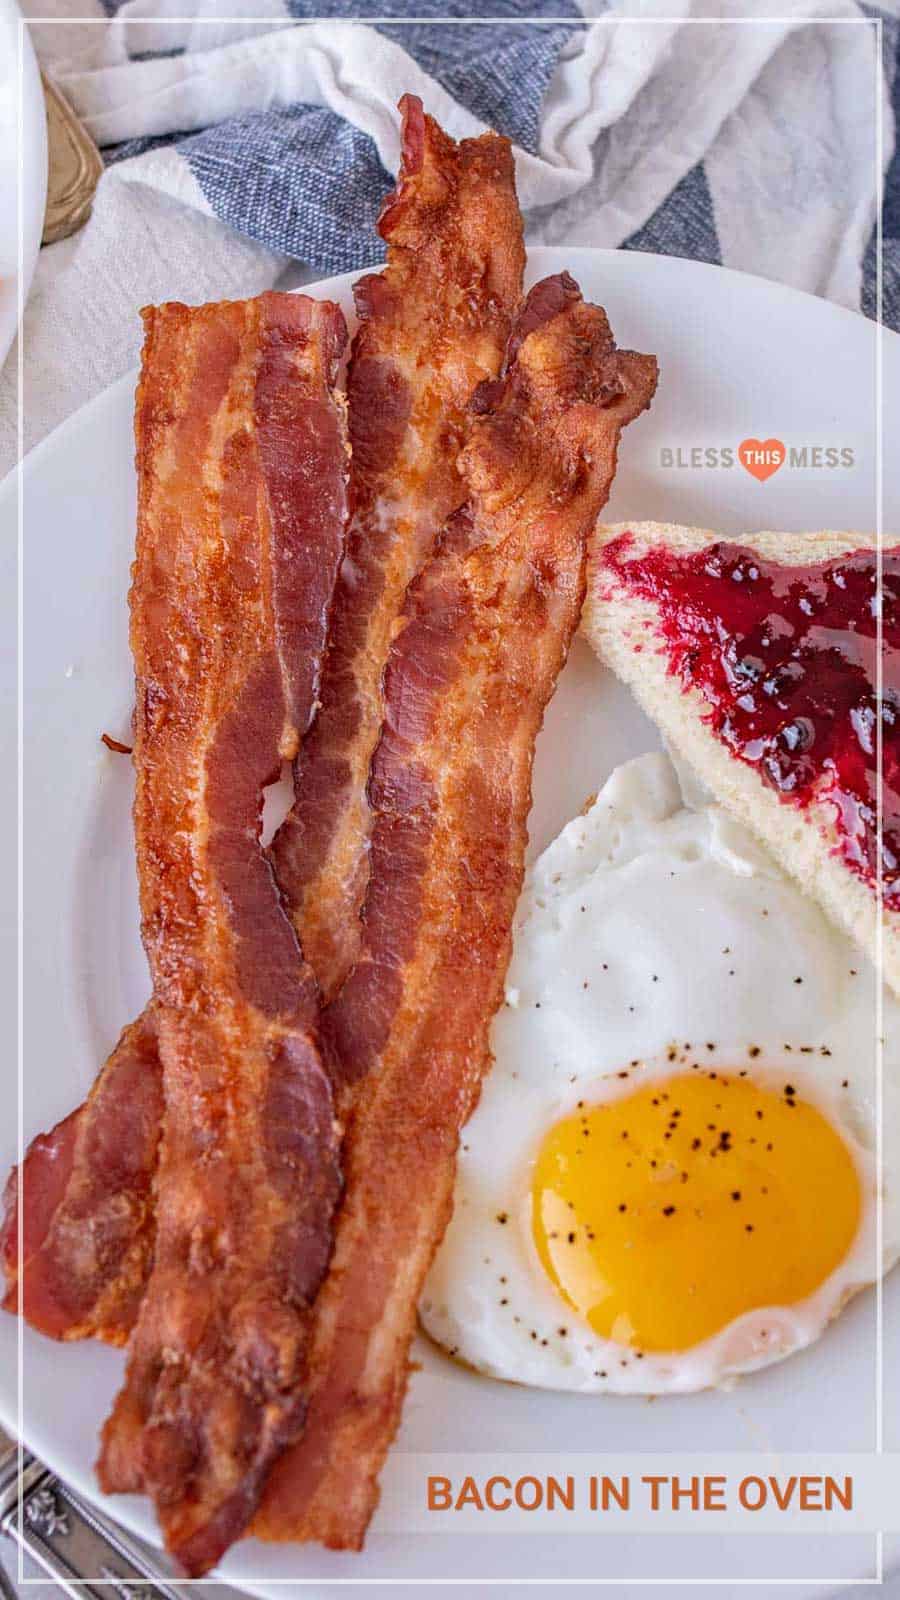 Baking bacon in the oven is the simplest way to make a large or small amount of crispy bacon -- with minimal cleanup! This easy bacon recipe comes out perfect every time. Anyone can make perfect bacon every time with this easy-to-follow oven recipe! #bacon #ovenbacon #bakedbacon #easybacon #baconrecipe #howtomakebacon